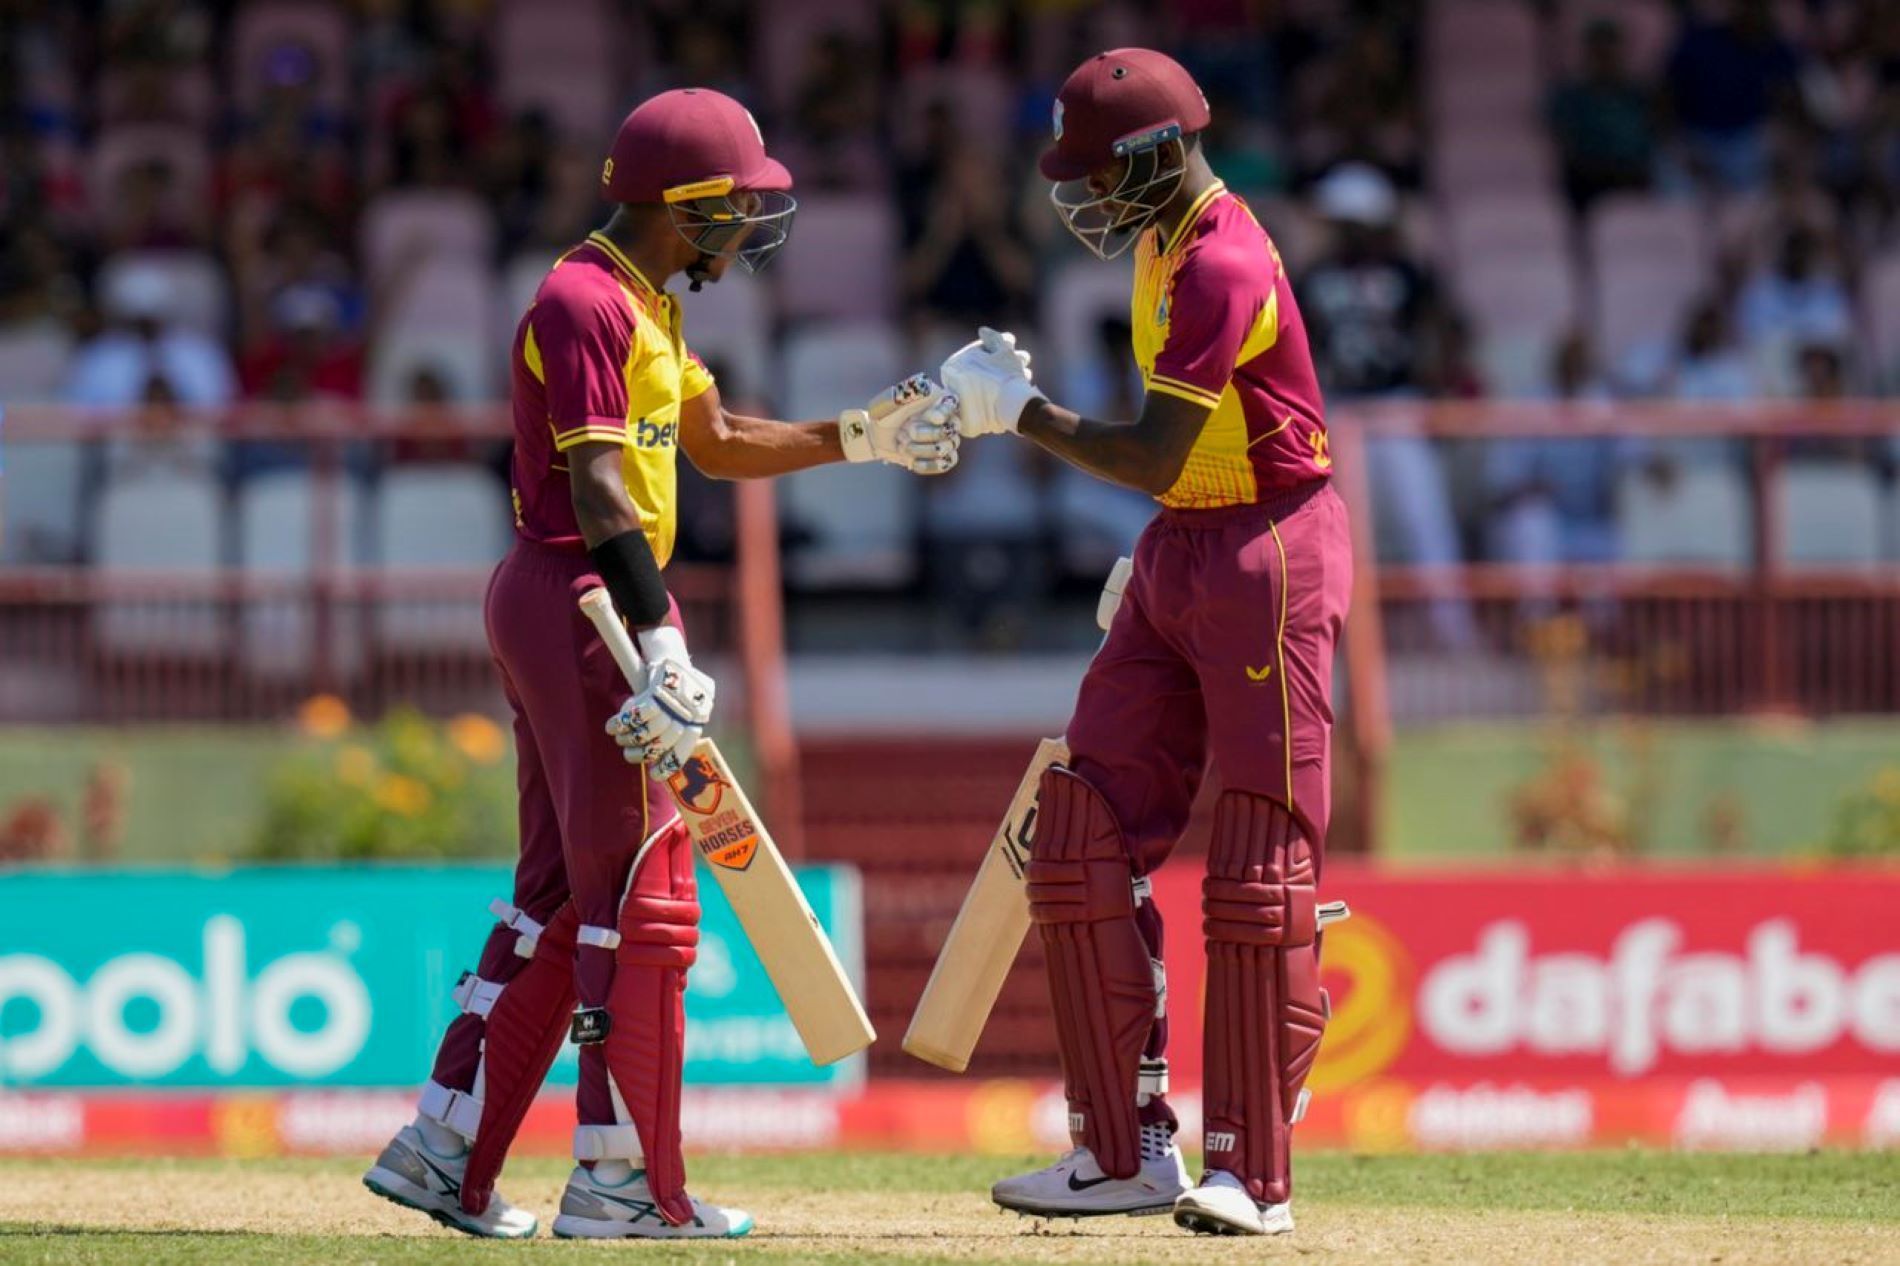 West Indies have three games to win one and come away with the series victory.